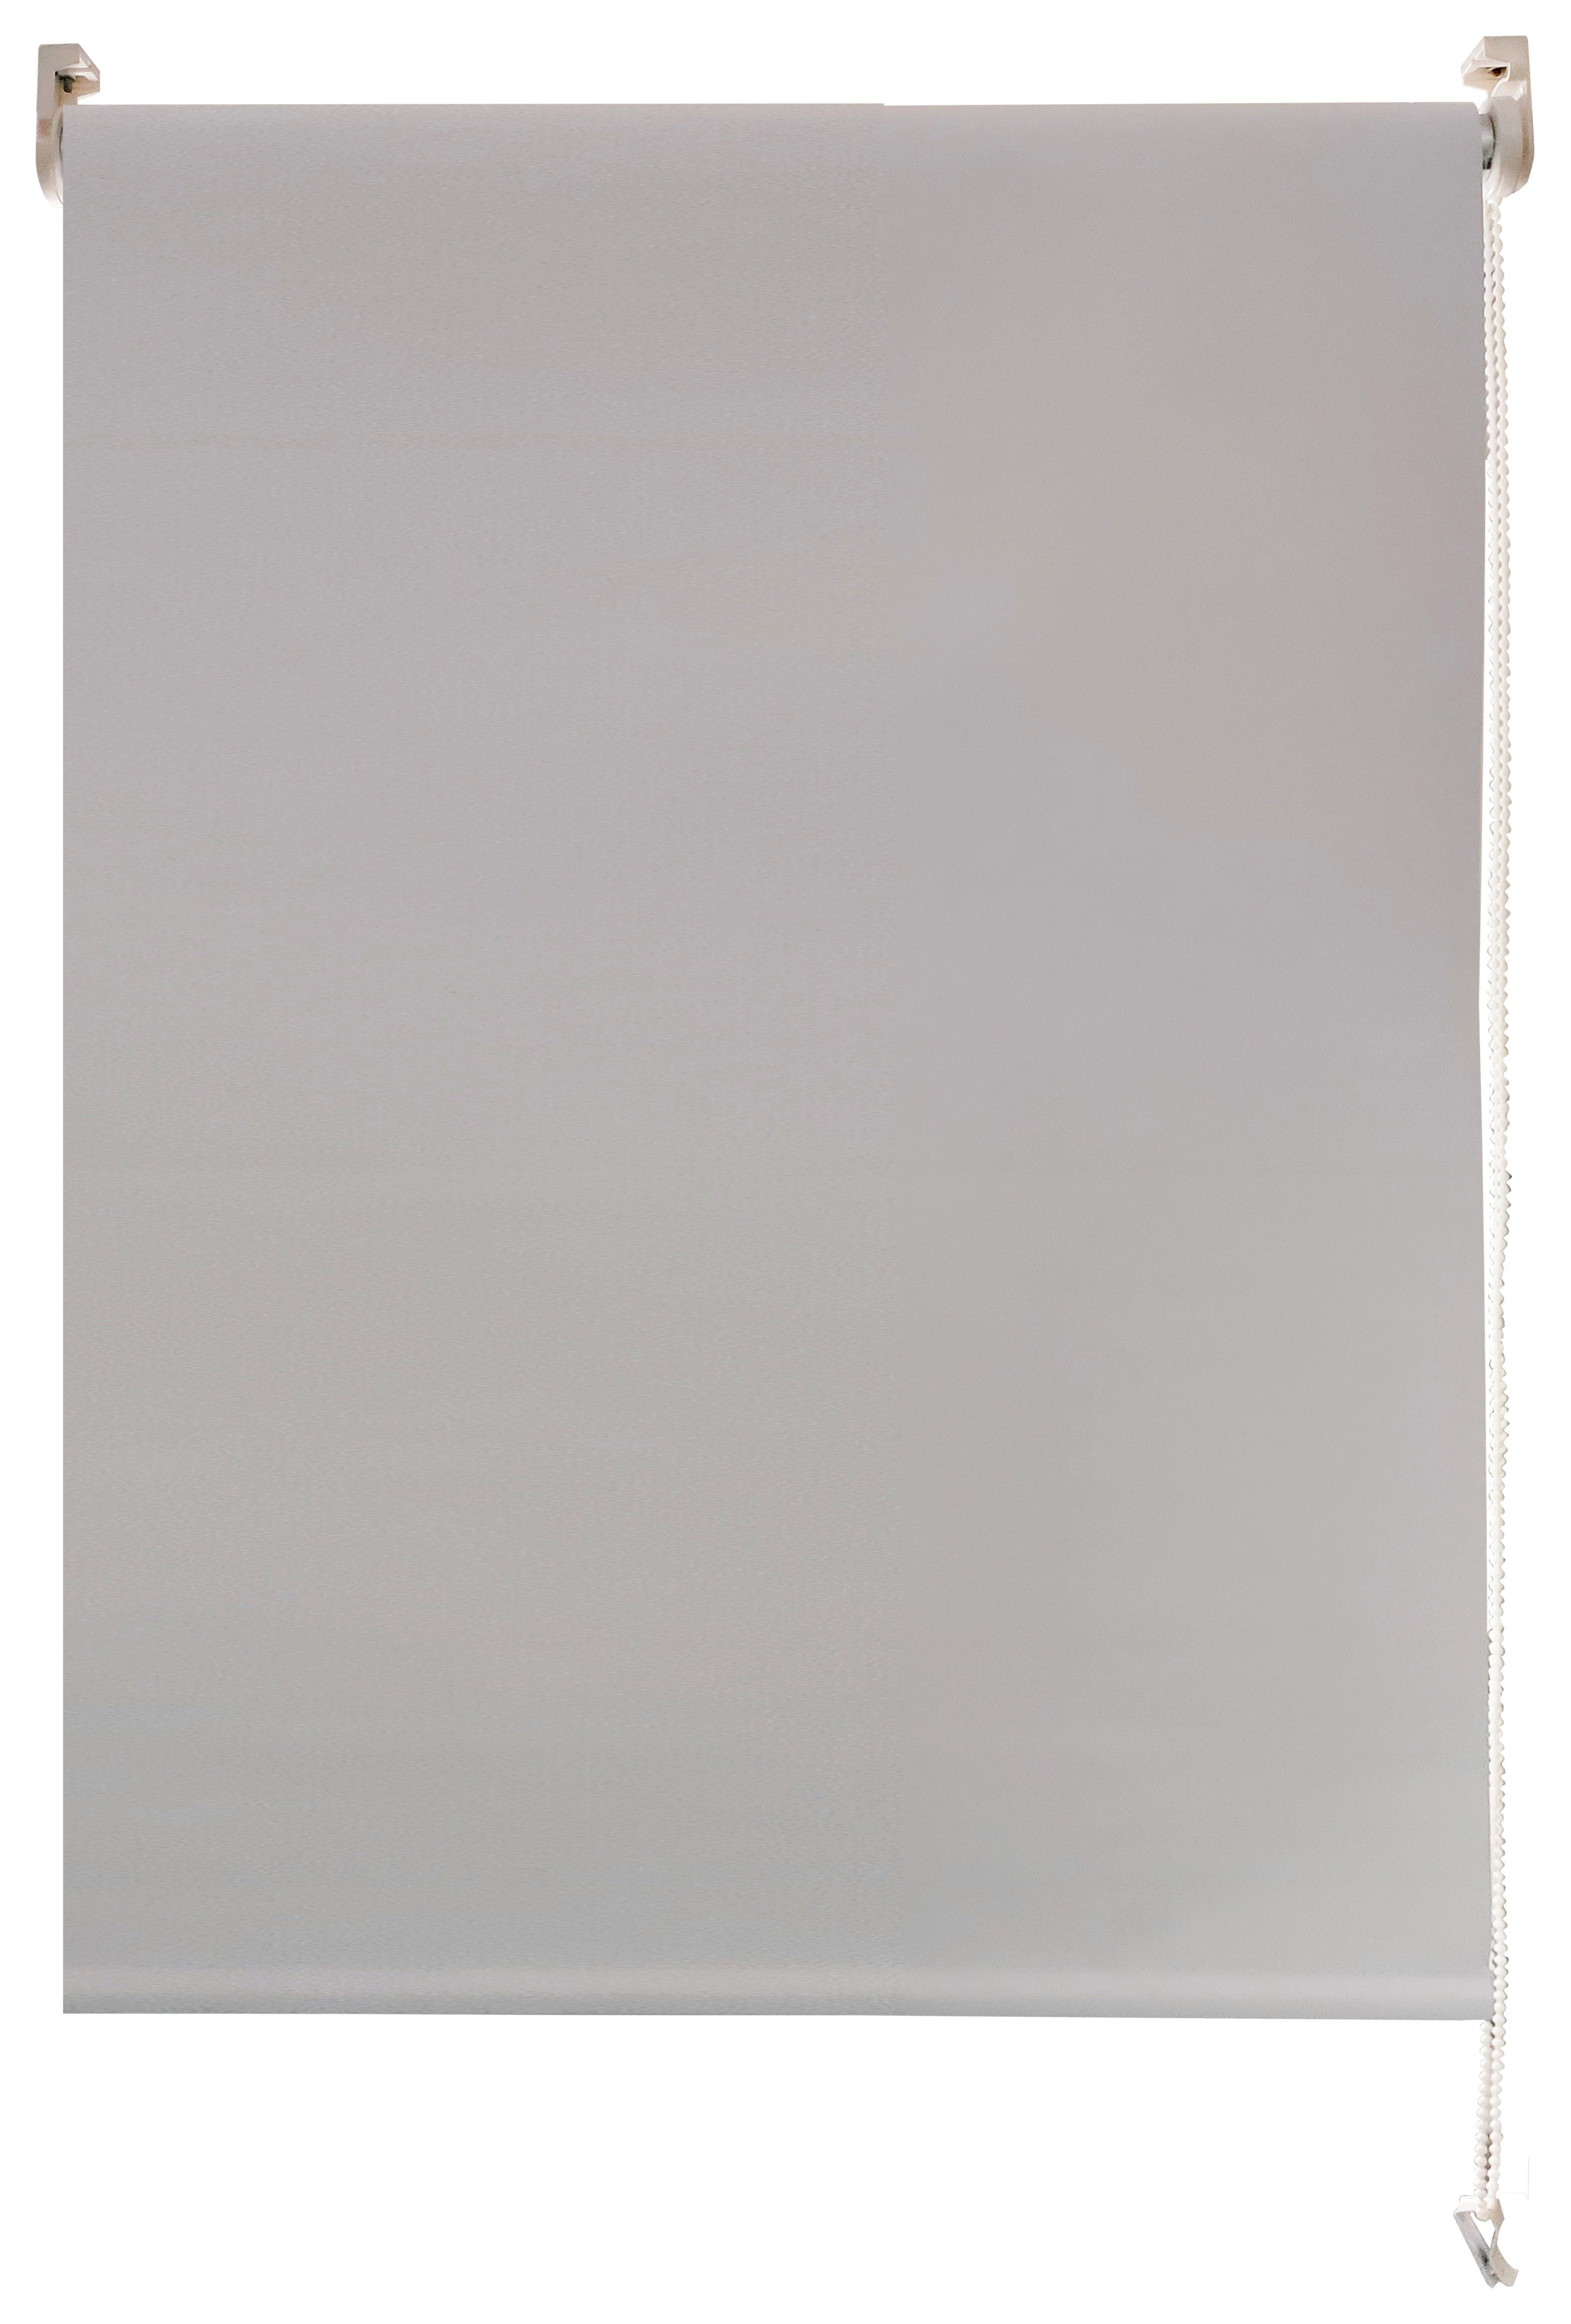 Image of Wickes Blackout Roller Blind Grey 90x170cm